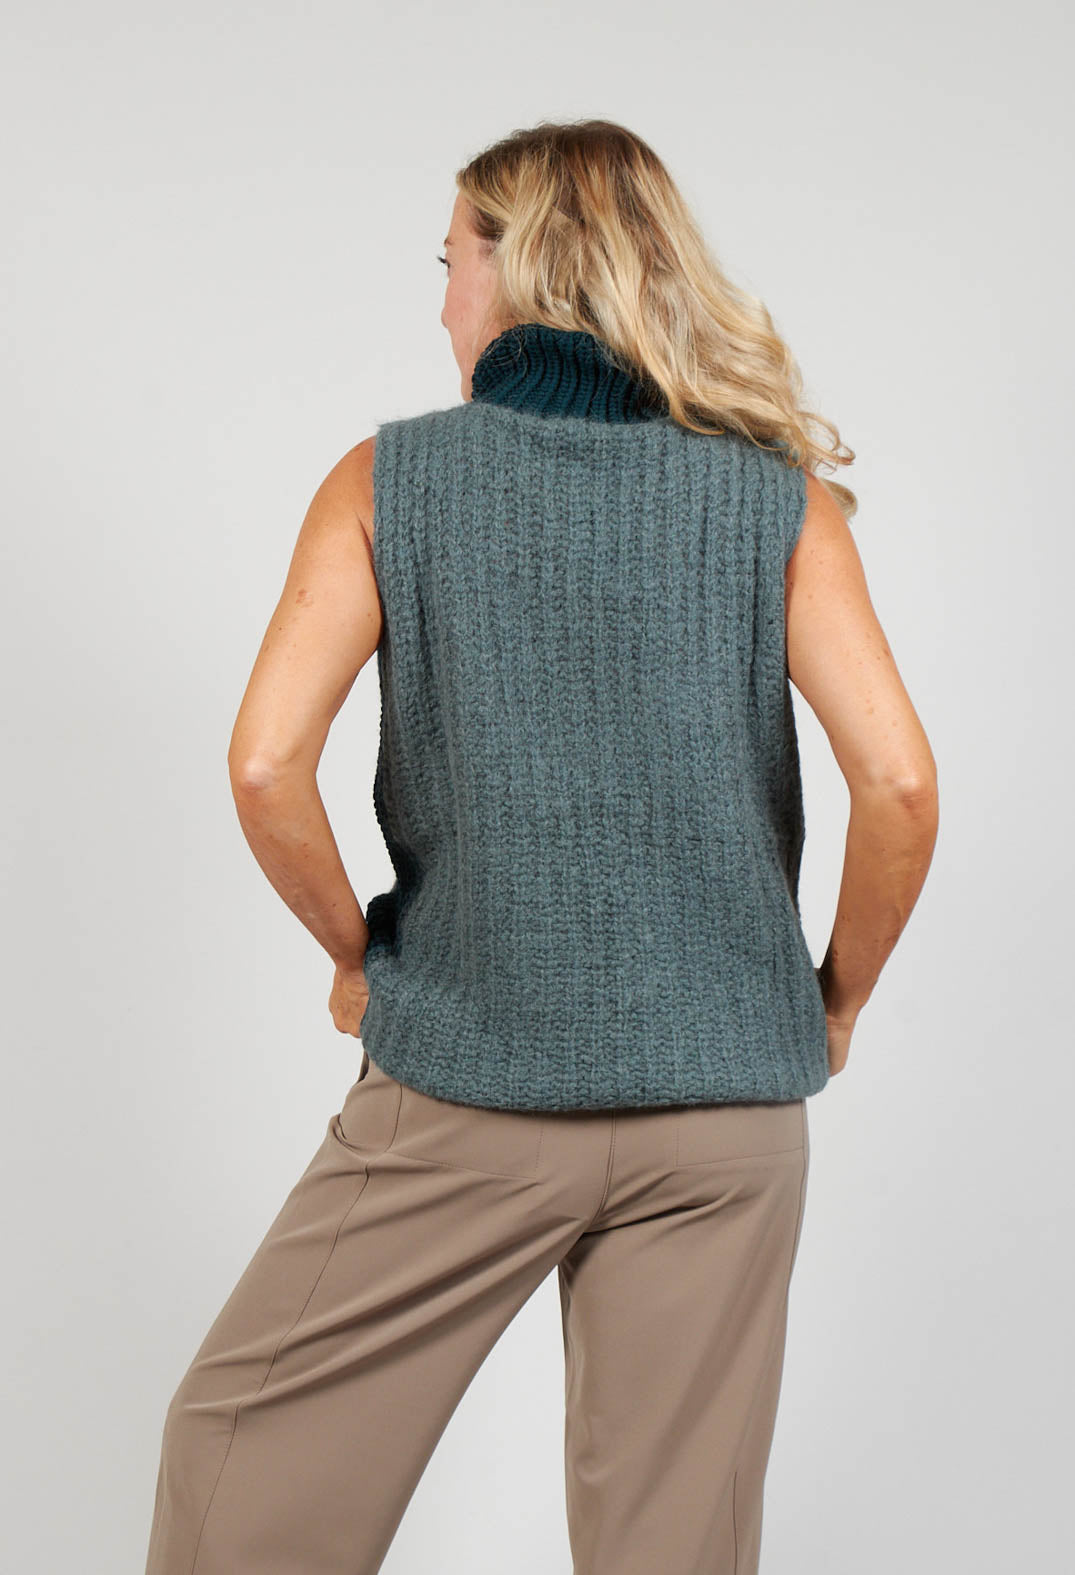 behind shot of a green and grey patterned ladies sleeveless knit jumper